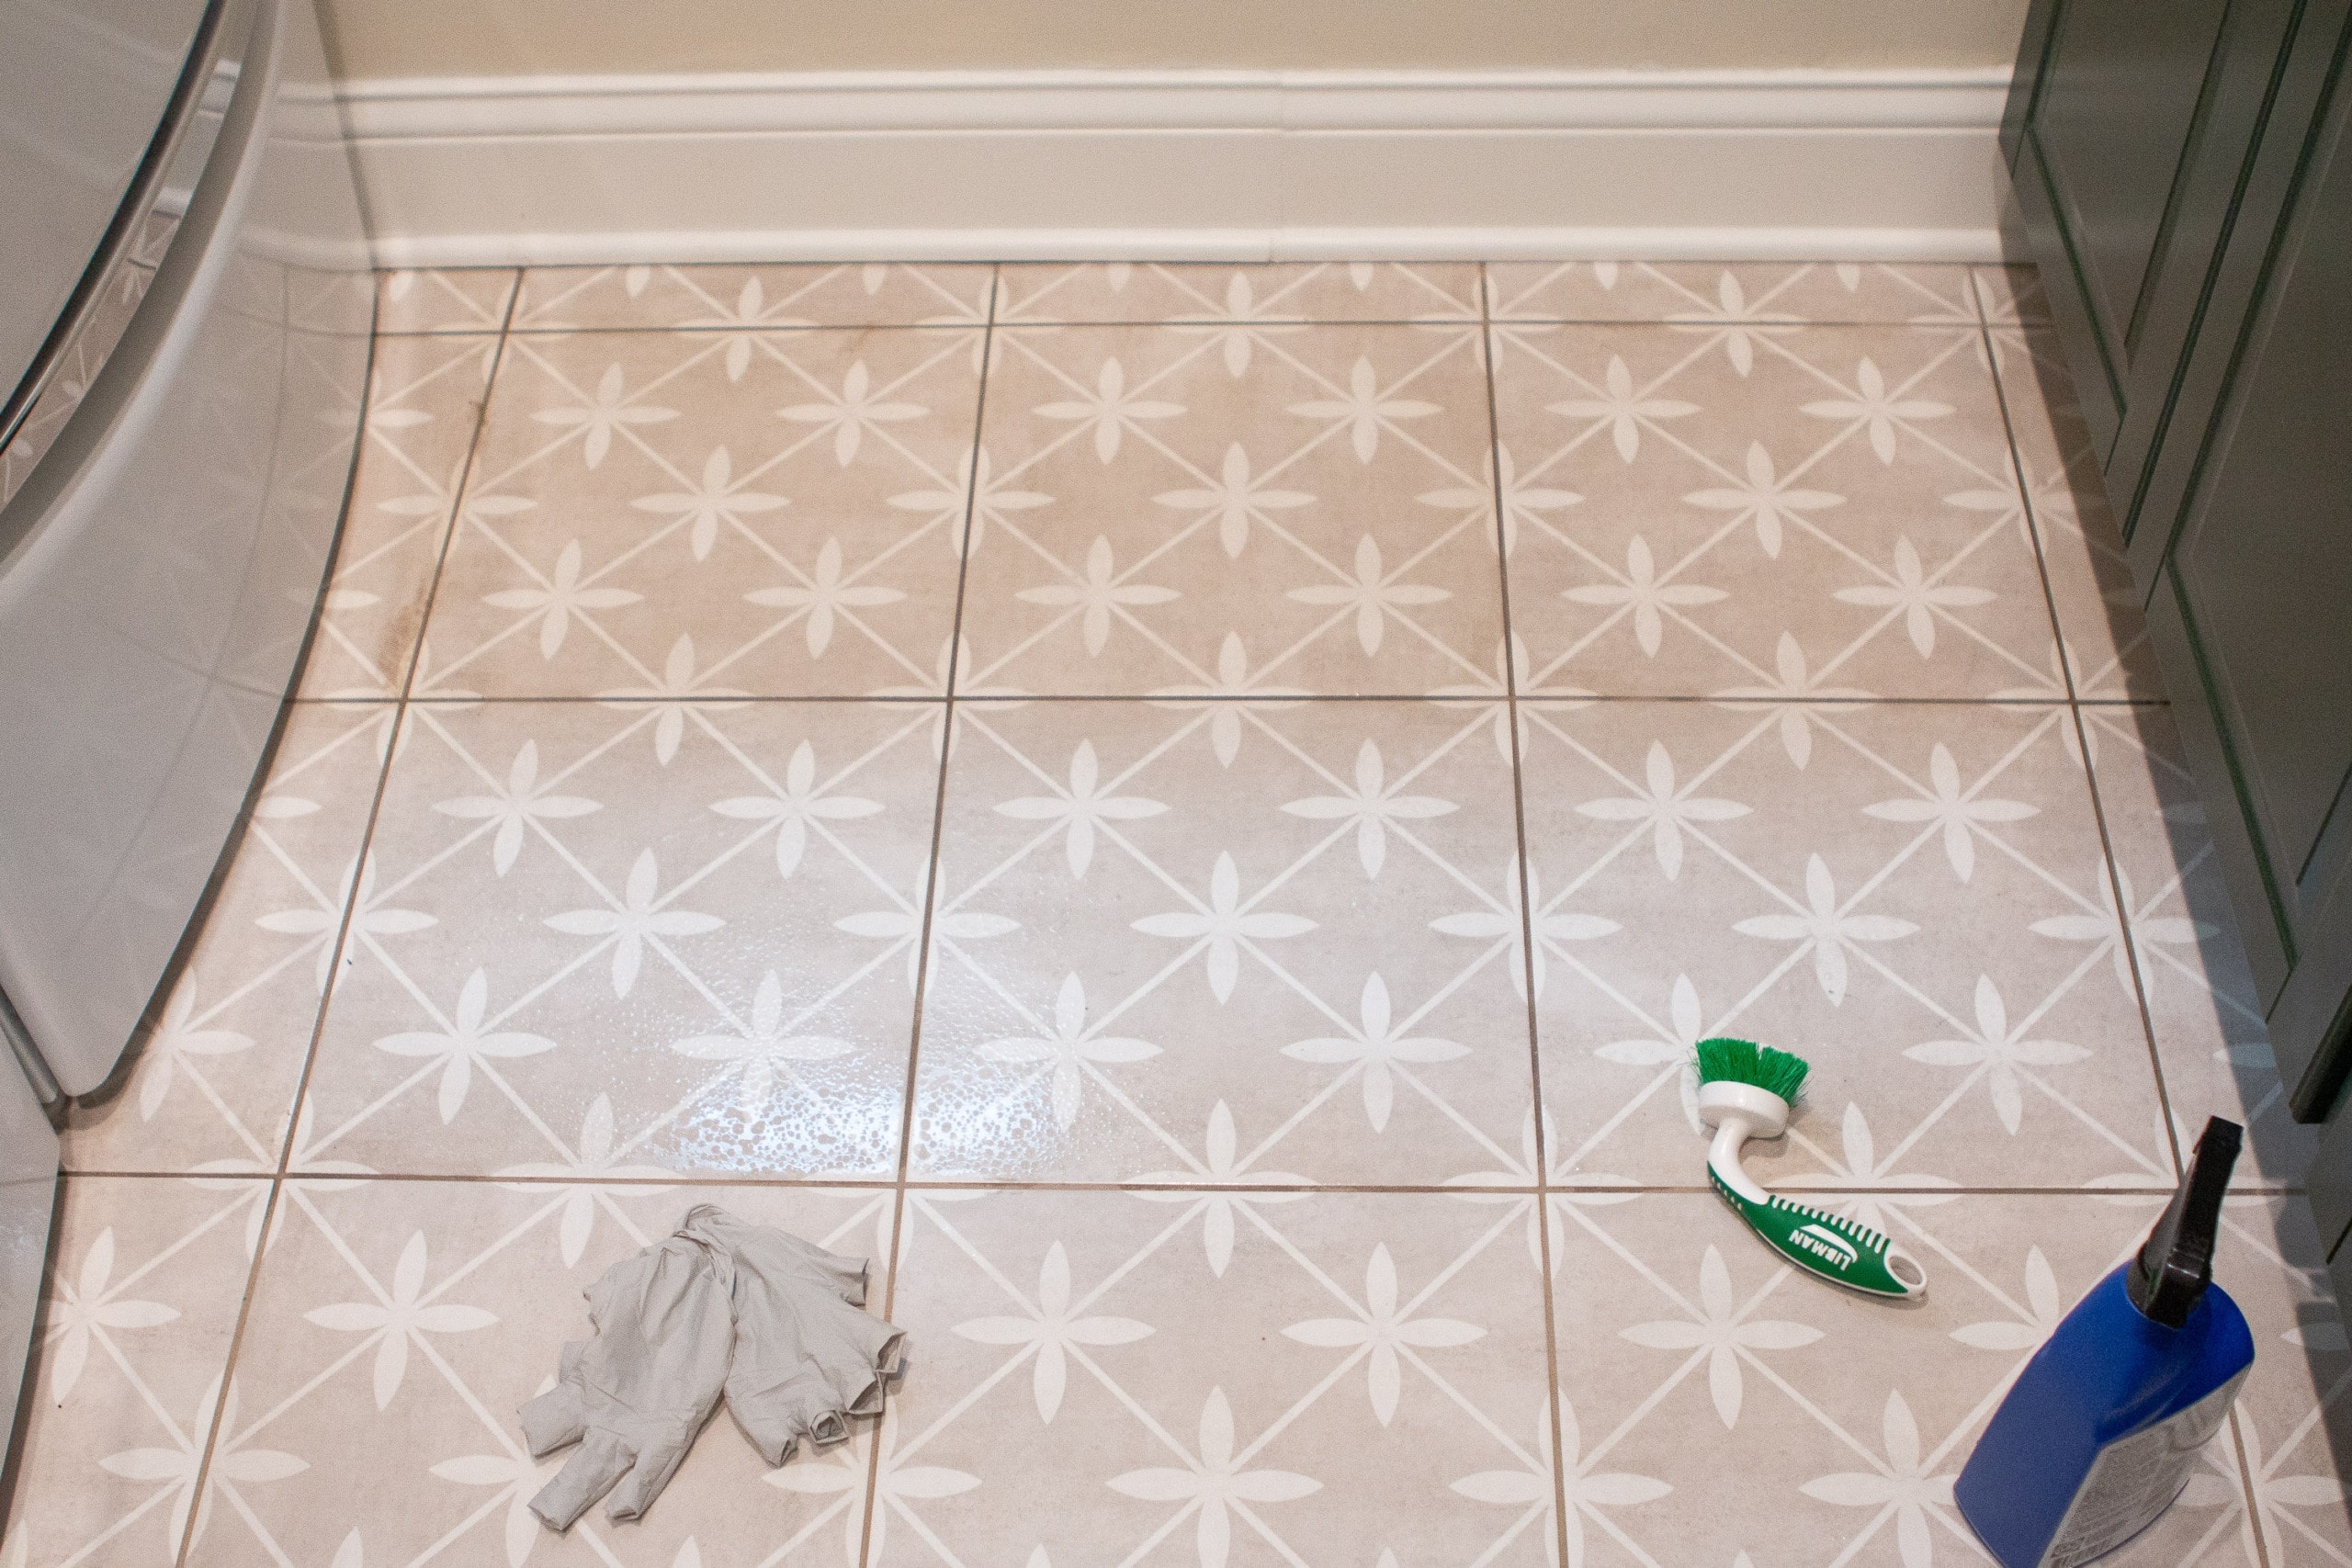 Clean And Seal Porcelain Tile Grout, What Do You Seal Porcelain Tile With